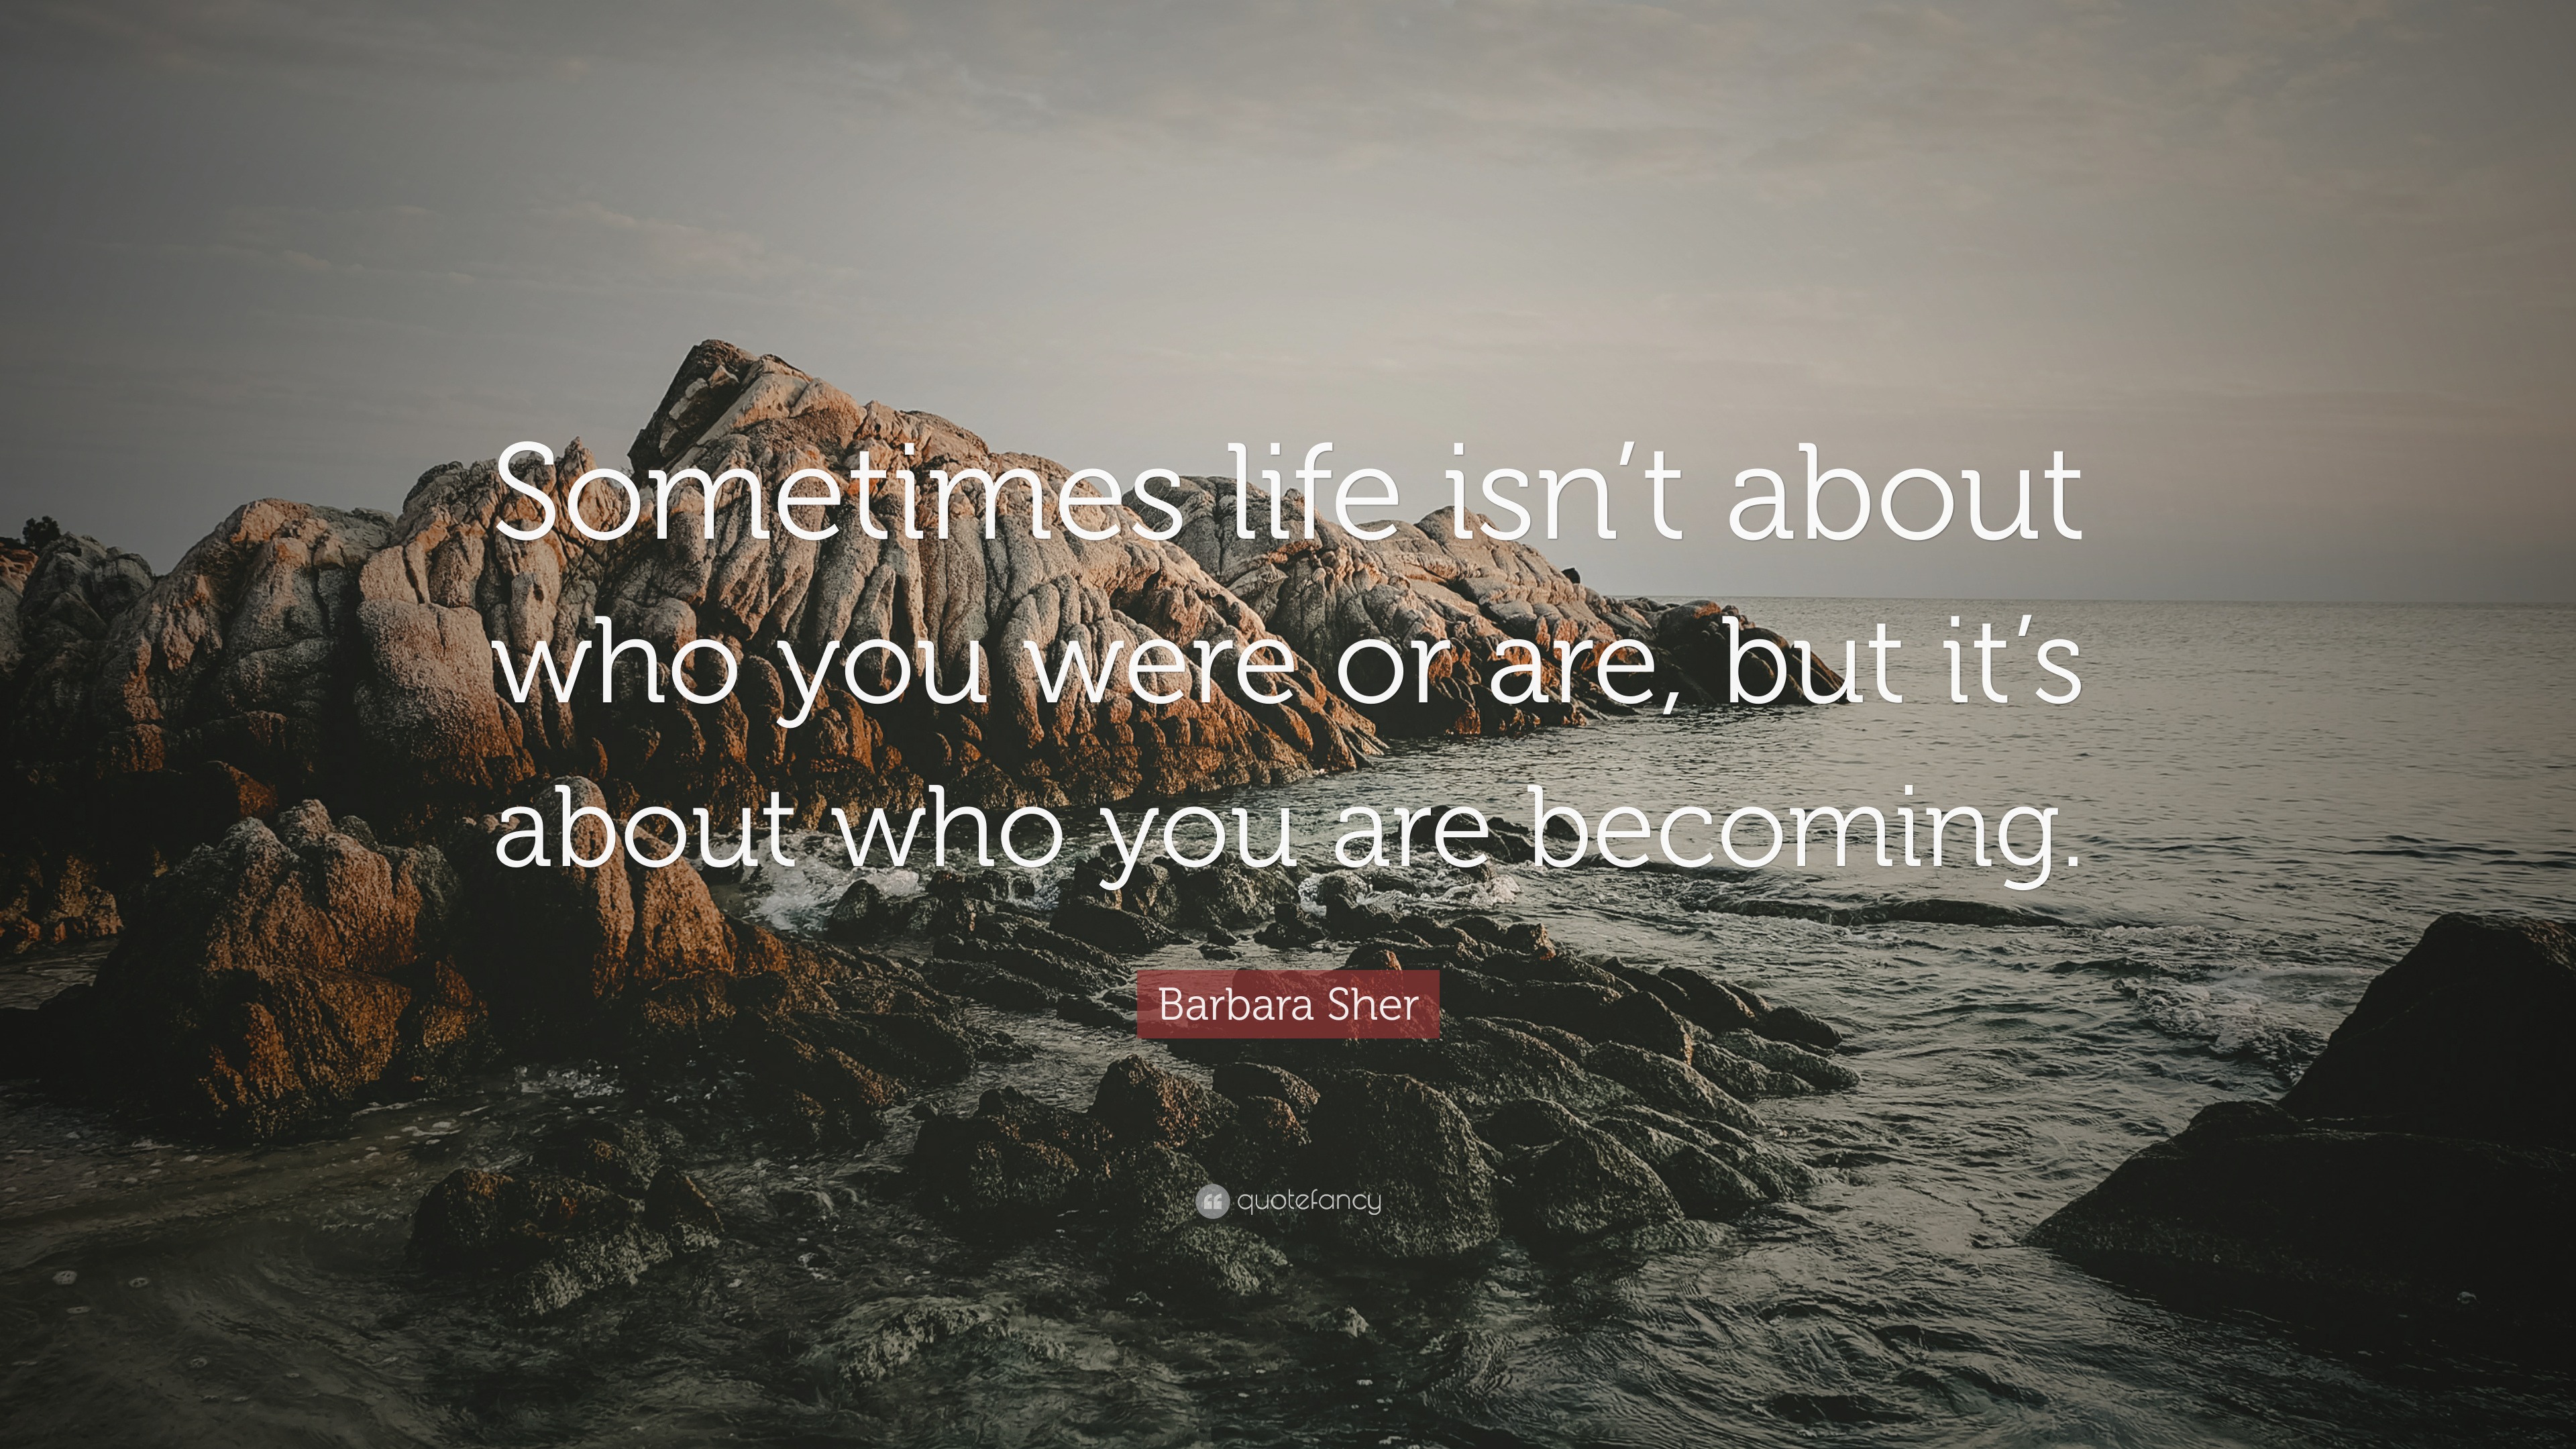 Barbara Sher Quote: “Sometimes life isn’t about who you were or are ...